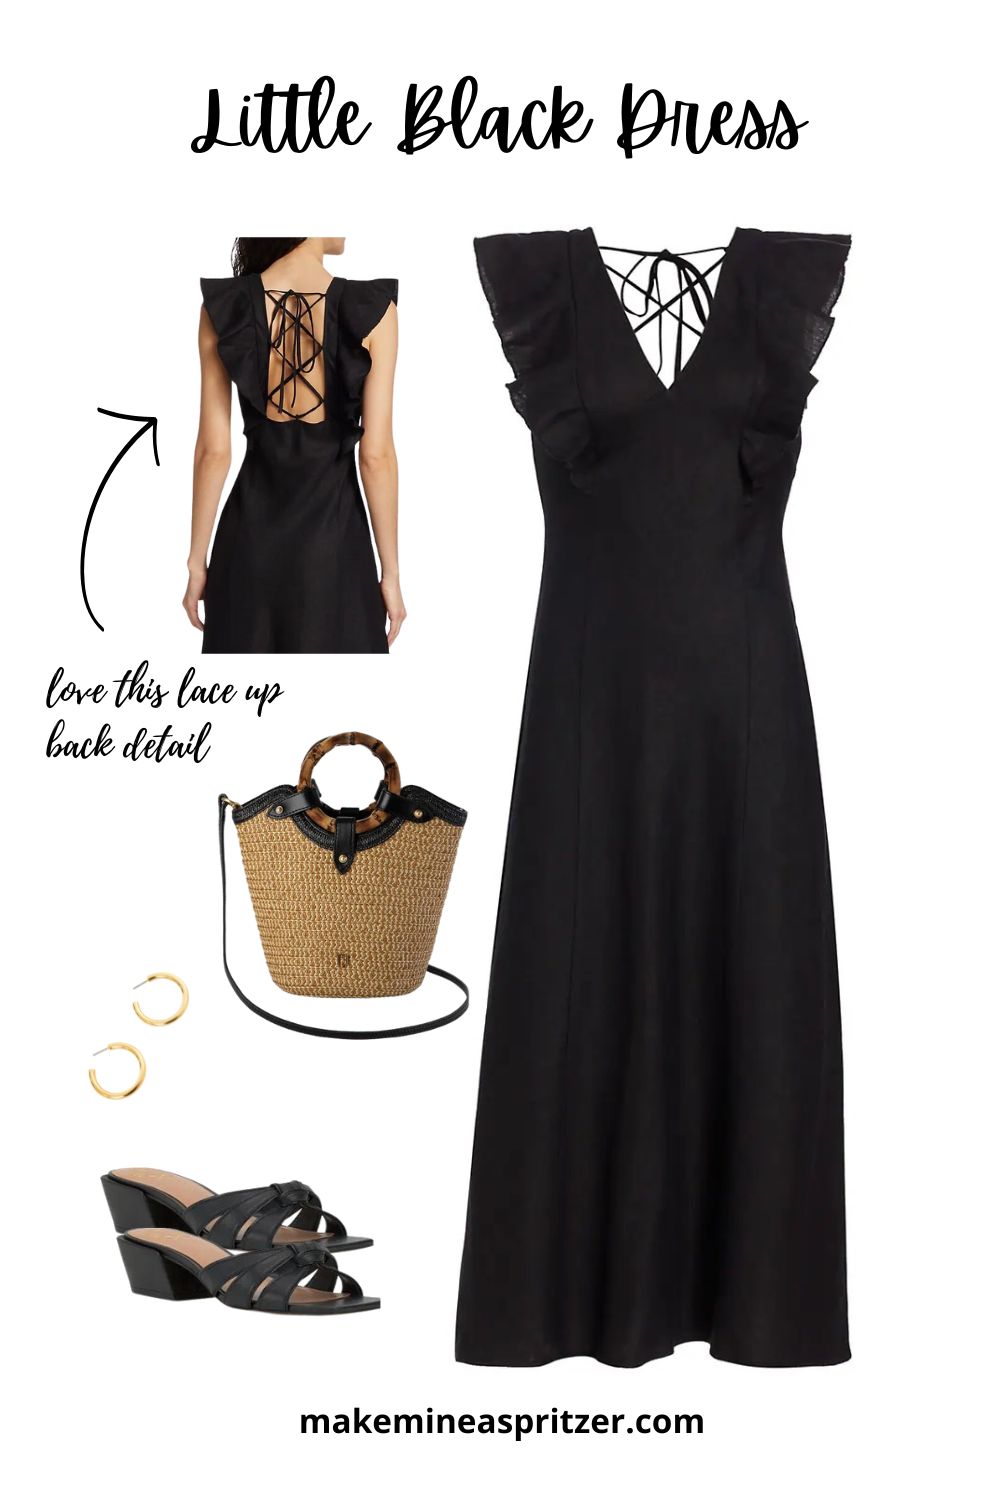 Little black dress outfit collage.